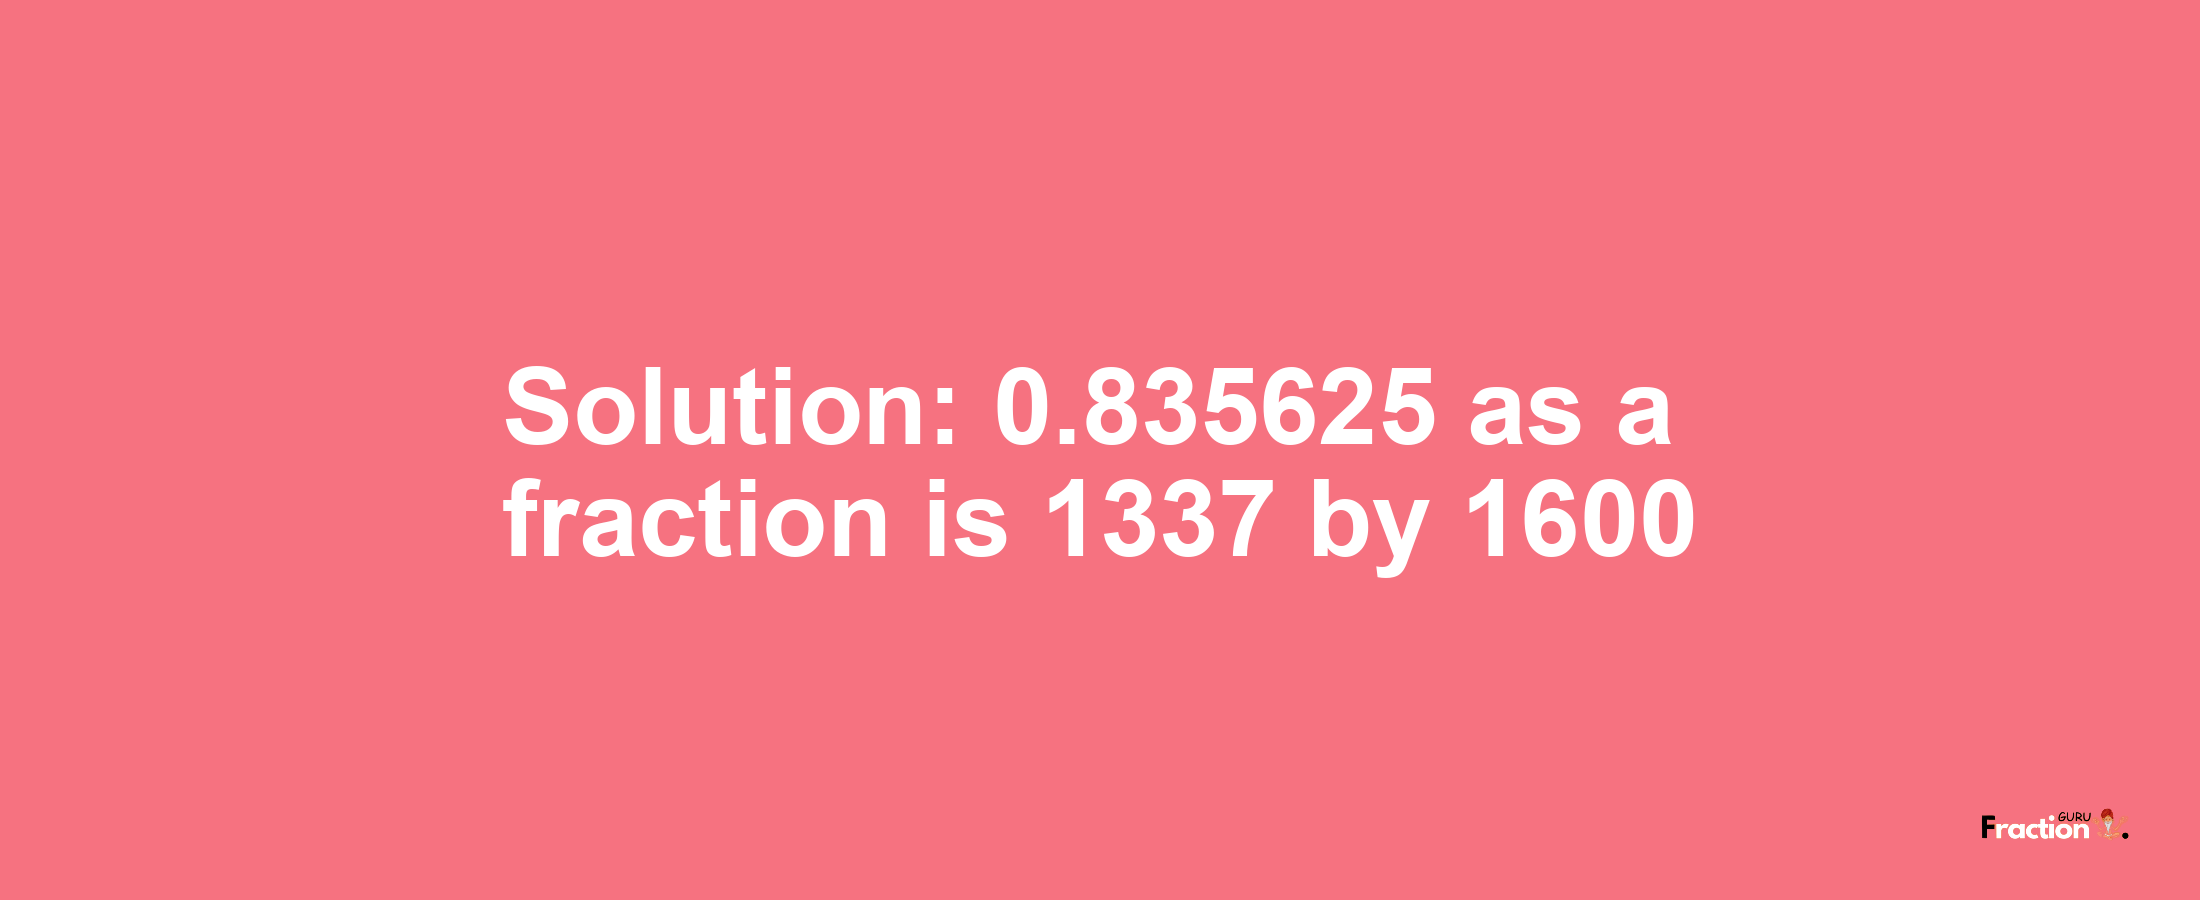 Solution:0.835625 as a fraction is 1337/1600